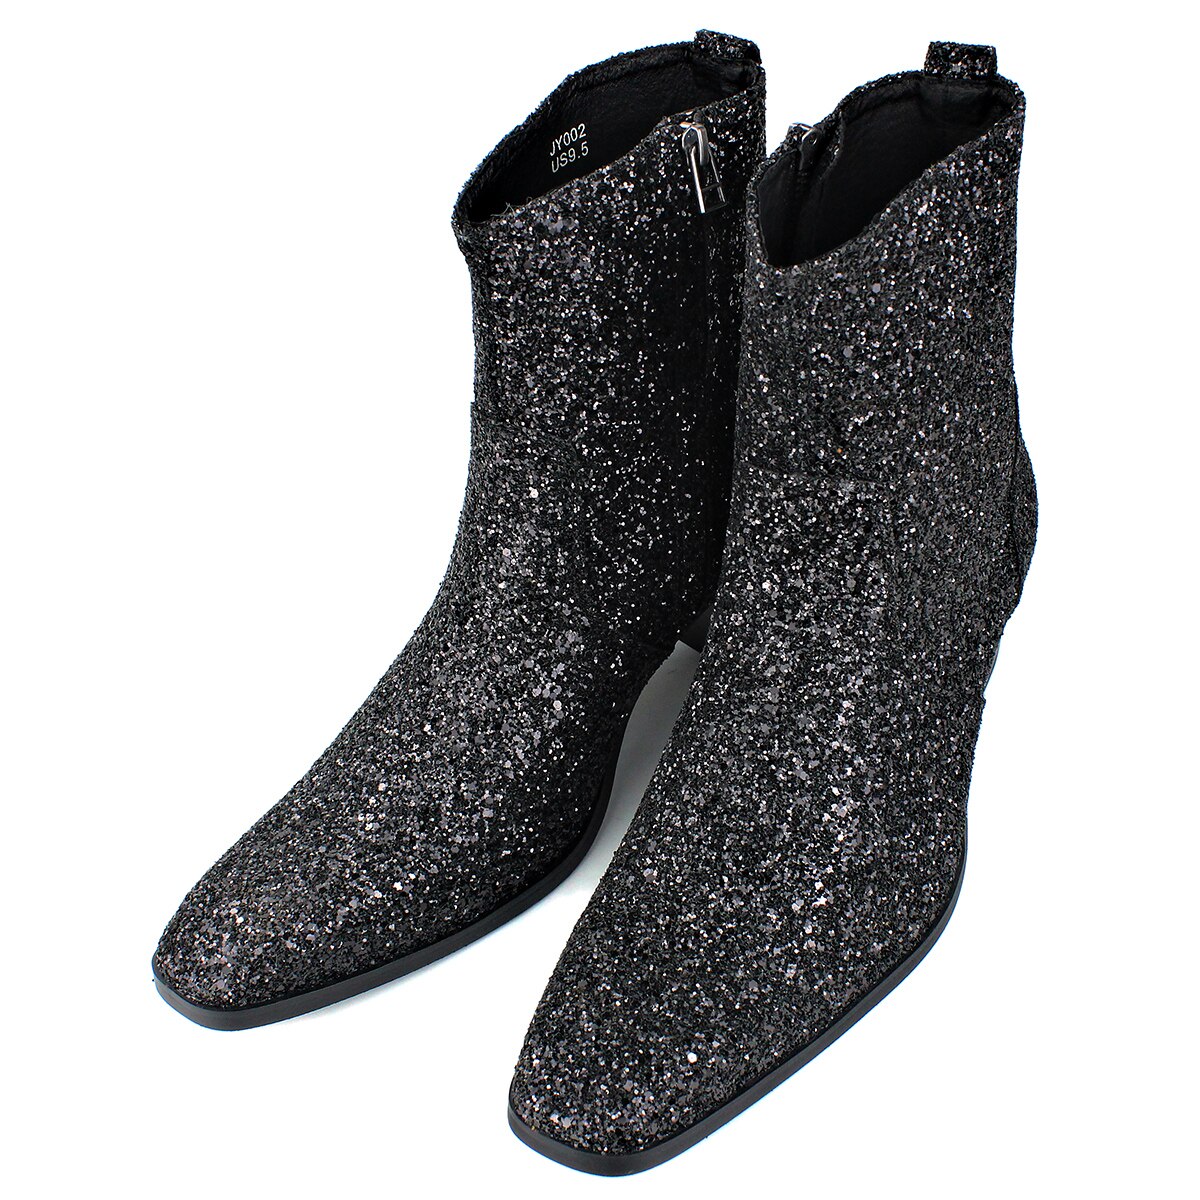 Fordan Glitter Genuine Leather Ankle Boots